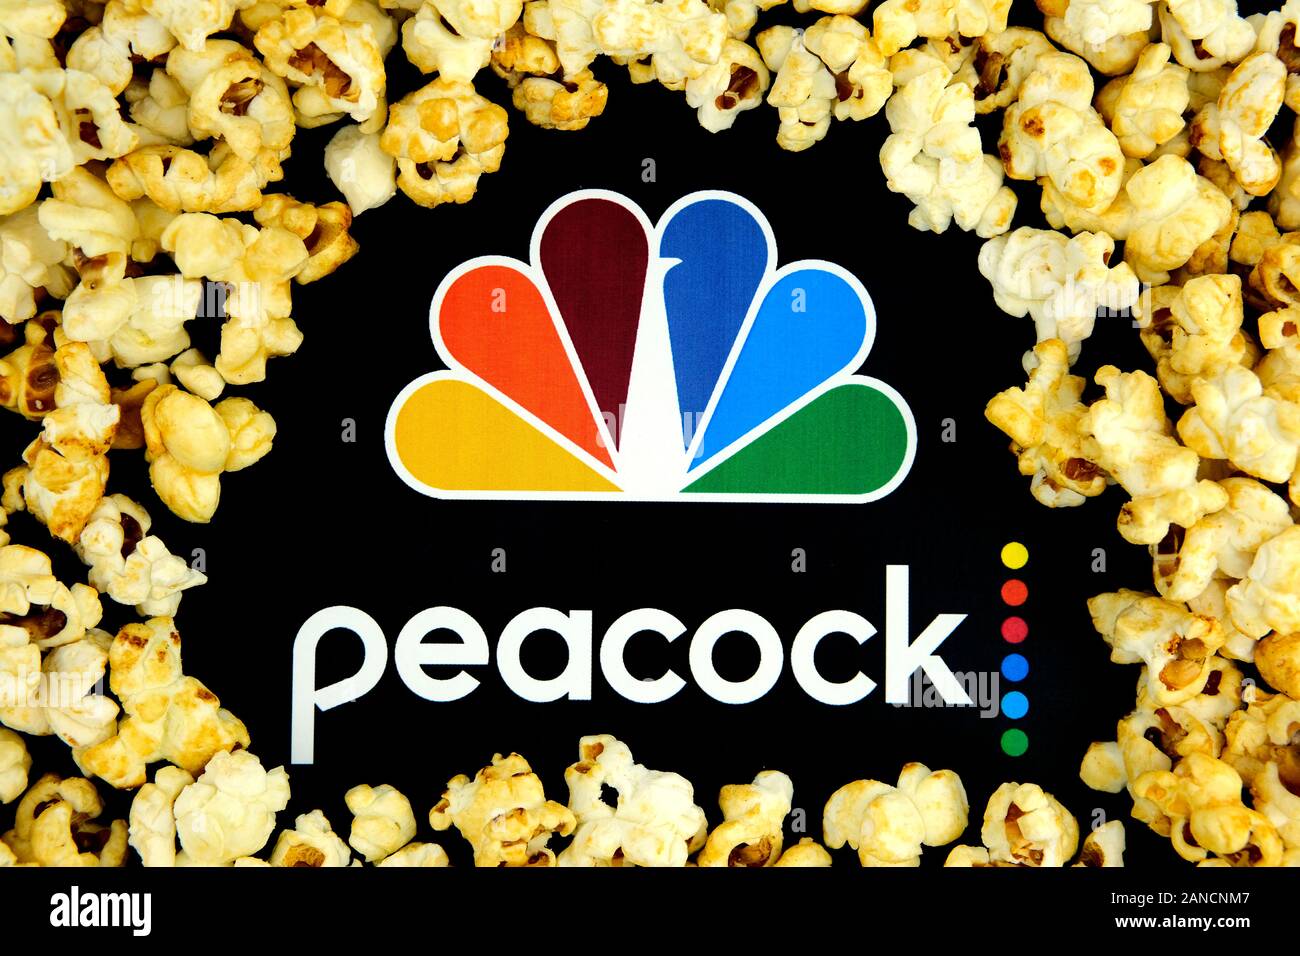 Peacock streaming service logo on the paper brochure and caramel popcorn around it. Concept for a new streaming video service. Stock Photo